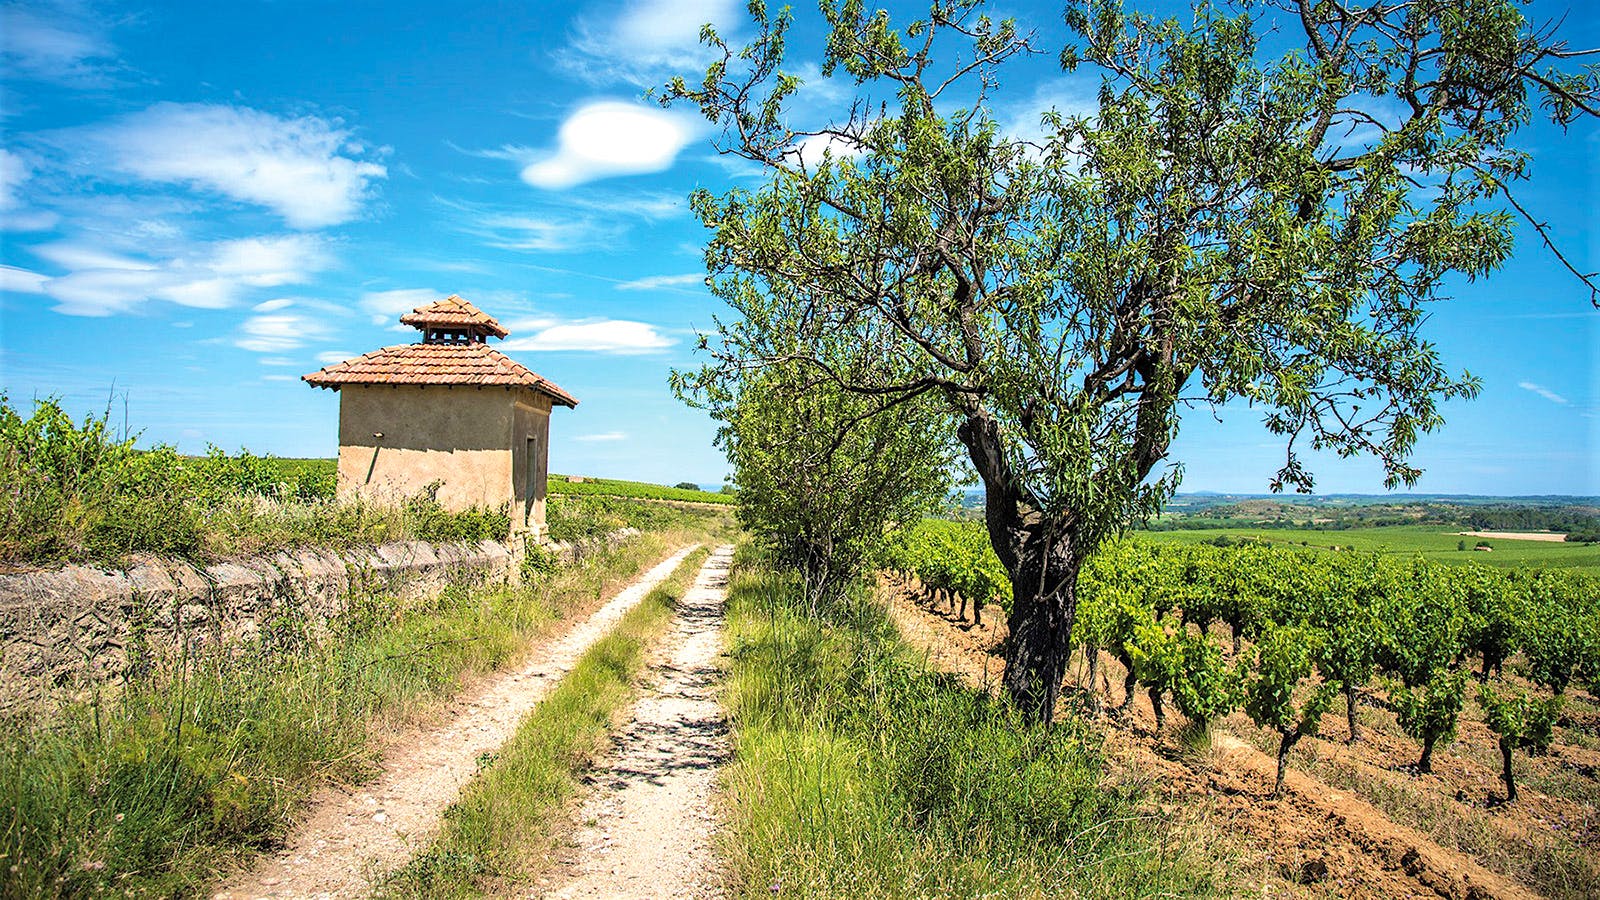 Alphabetical Guide to Languedoc